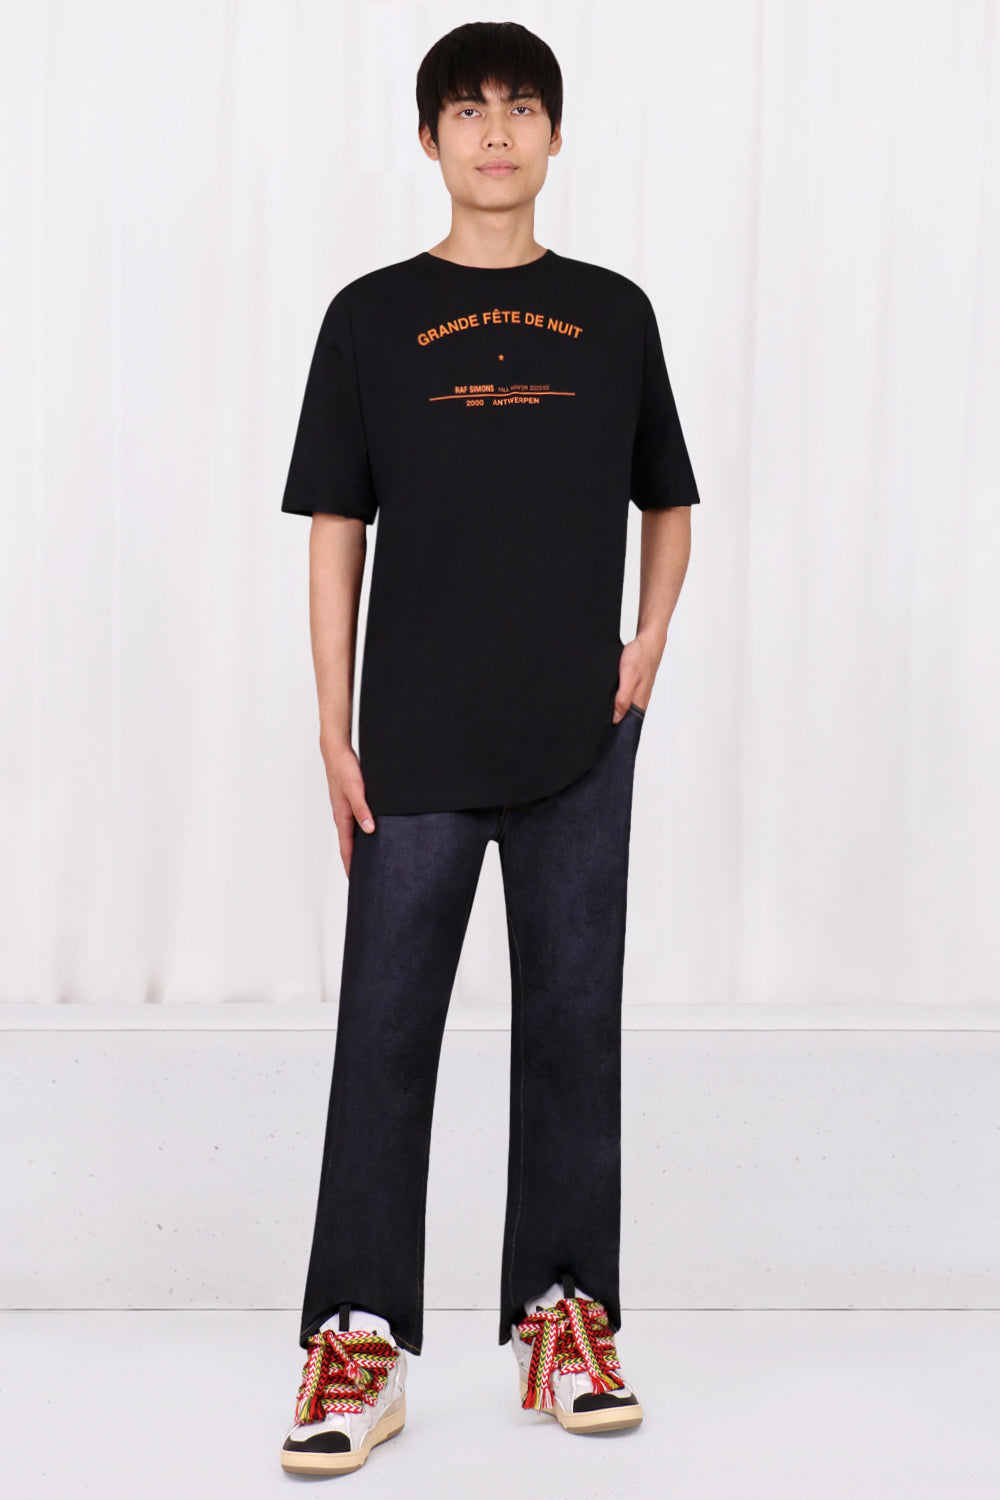 RAF SIMONS T-SHIRTS BIG FIT T-SHIRT WITH NIGHT PARTY PRINT